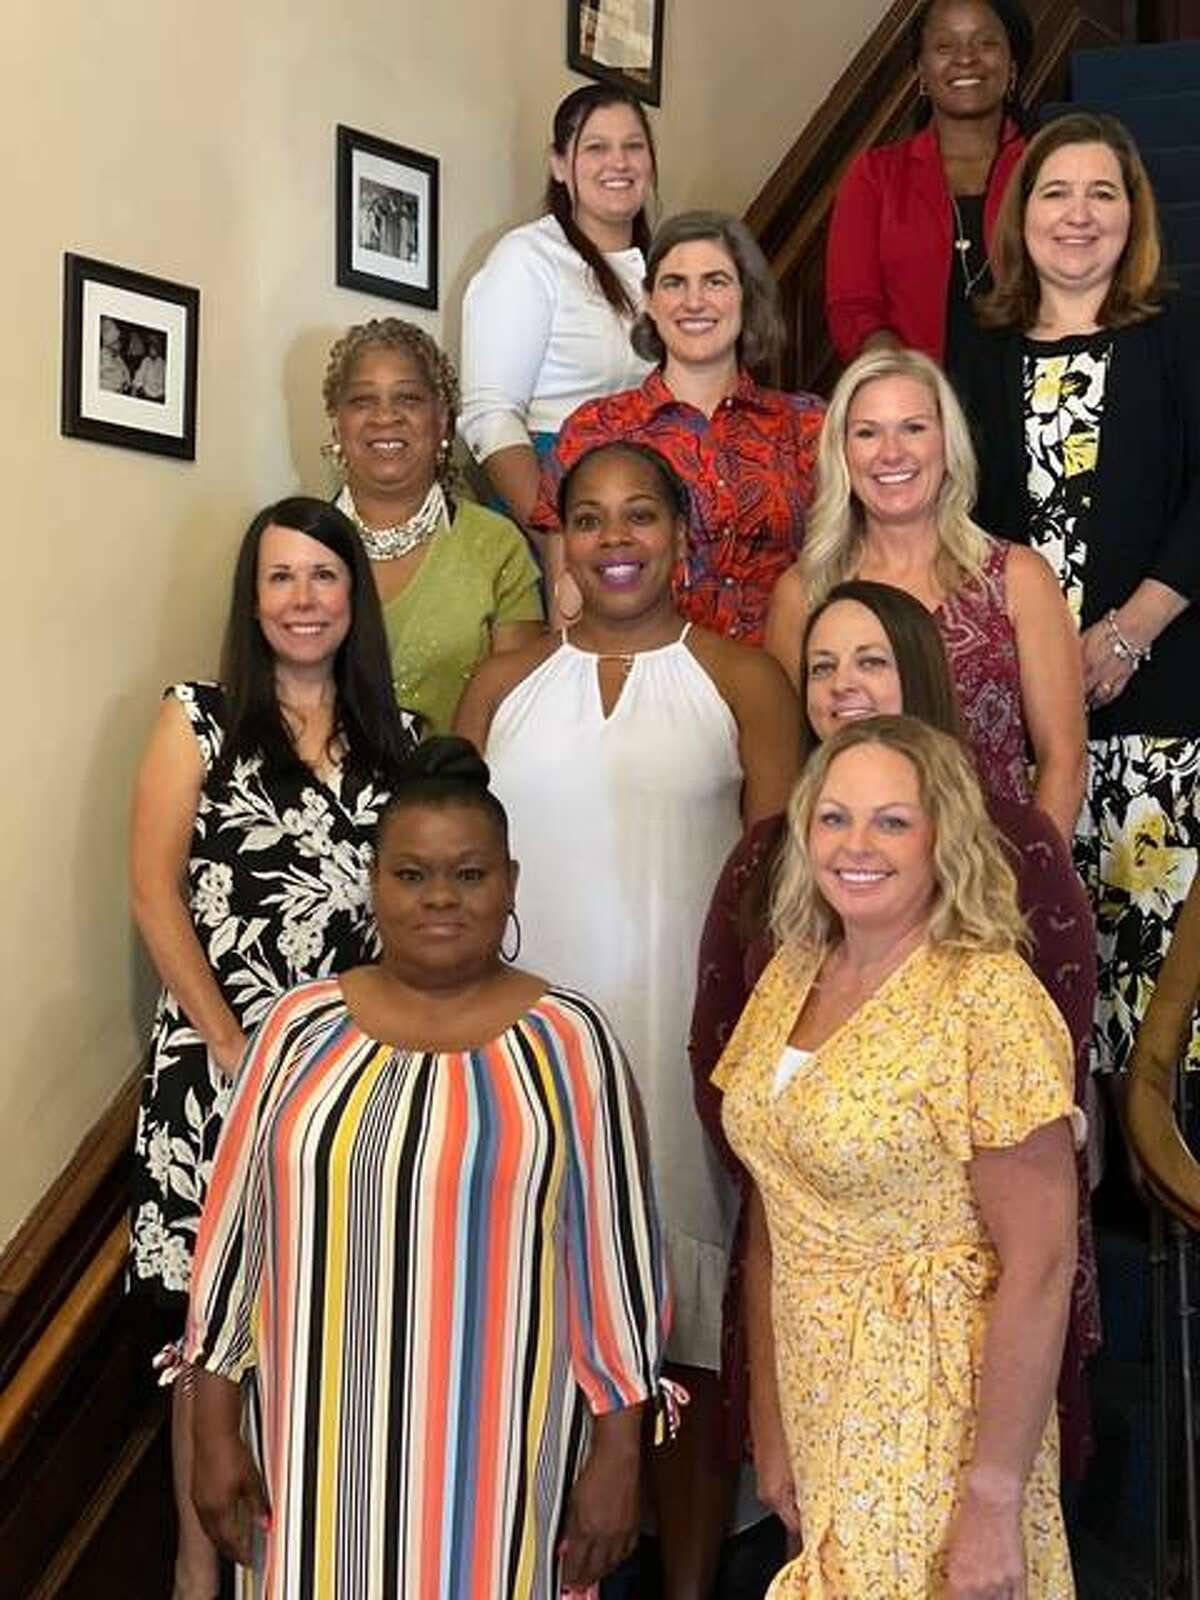 The 2021 Women of Distinction include, from bottom to top, Starrette Smith, Jennifer Gottlob, Crystal Uhe, Amy Gabriel, Yvonne Campbell, Lanea DeConcini, Marie Nelson, Lacy McDonald, Carrie Schildroth, Savanna Bishop, and Sandra West.